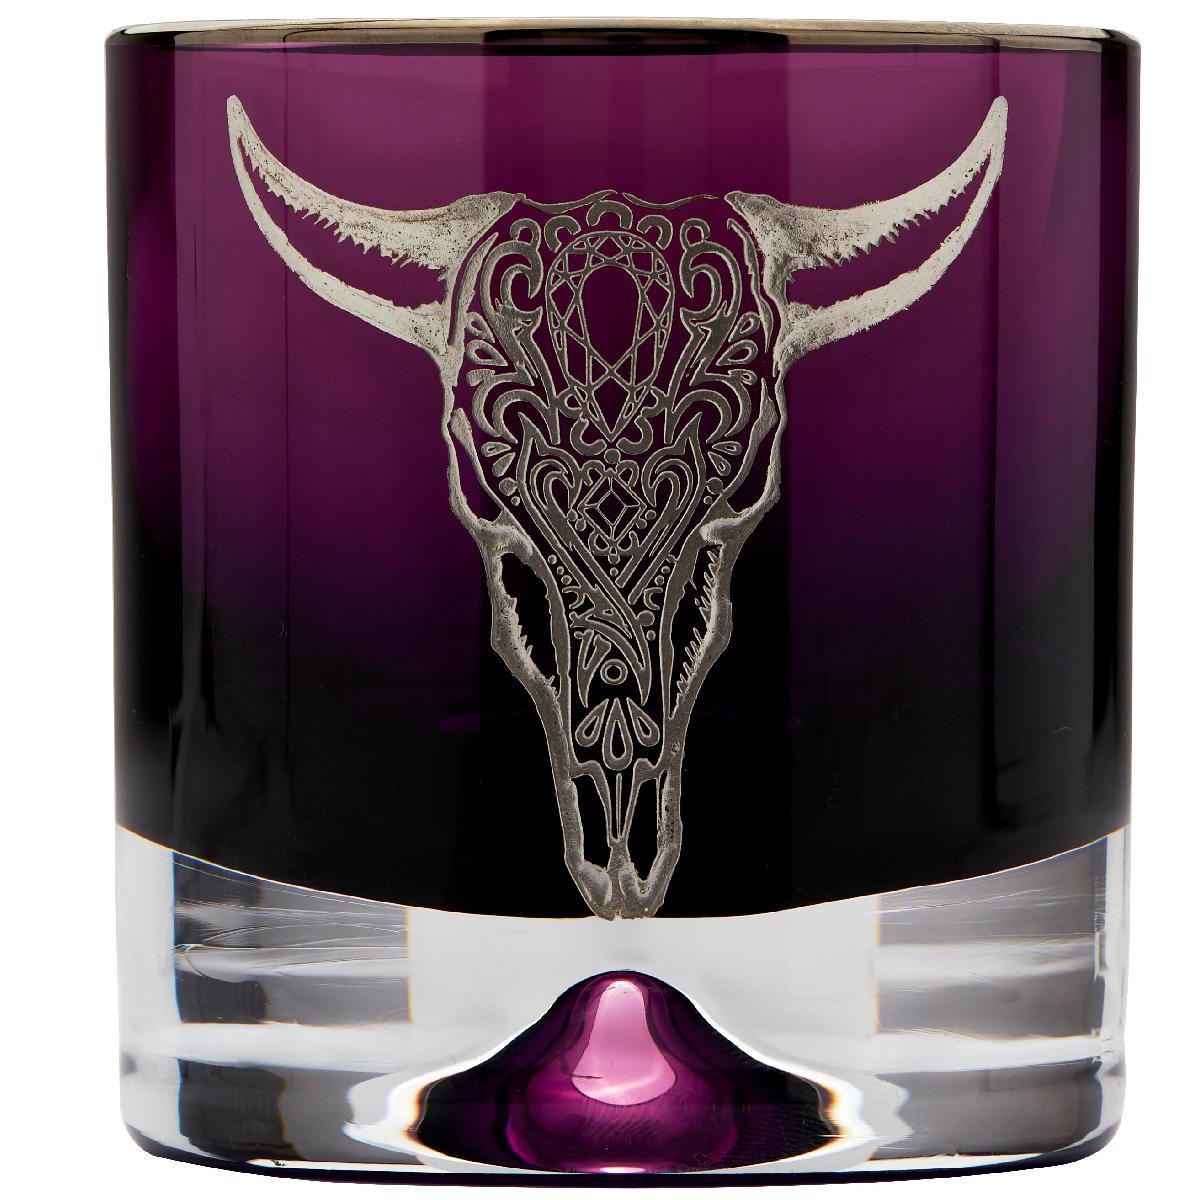 ‘Tequila Lore’ is a set of bold and eye-catching bar accessories that celebrates Mexico’s culture, folklore and famous tipple—tequila.

Lead crystal shot glasses and tumblers in either smoke or amethyst-colored glass, handmade in the UK, also